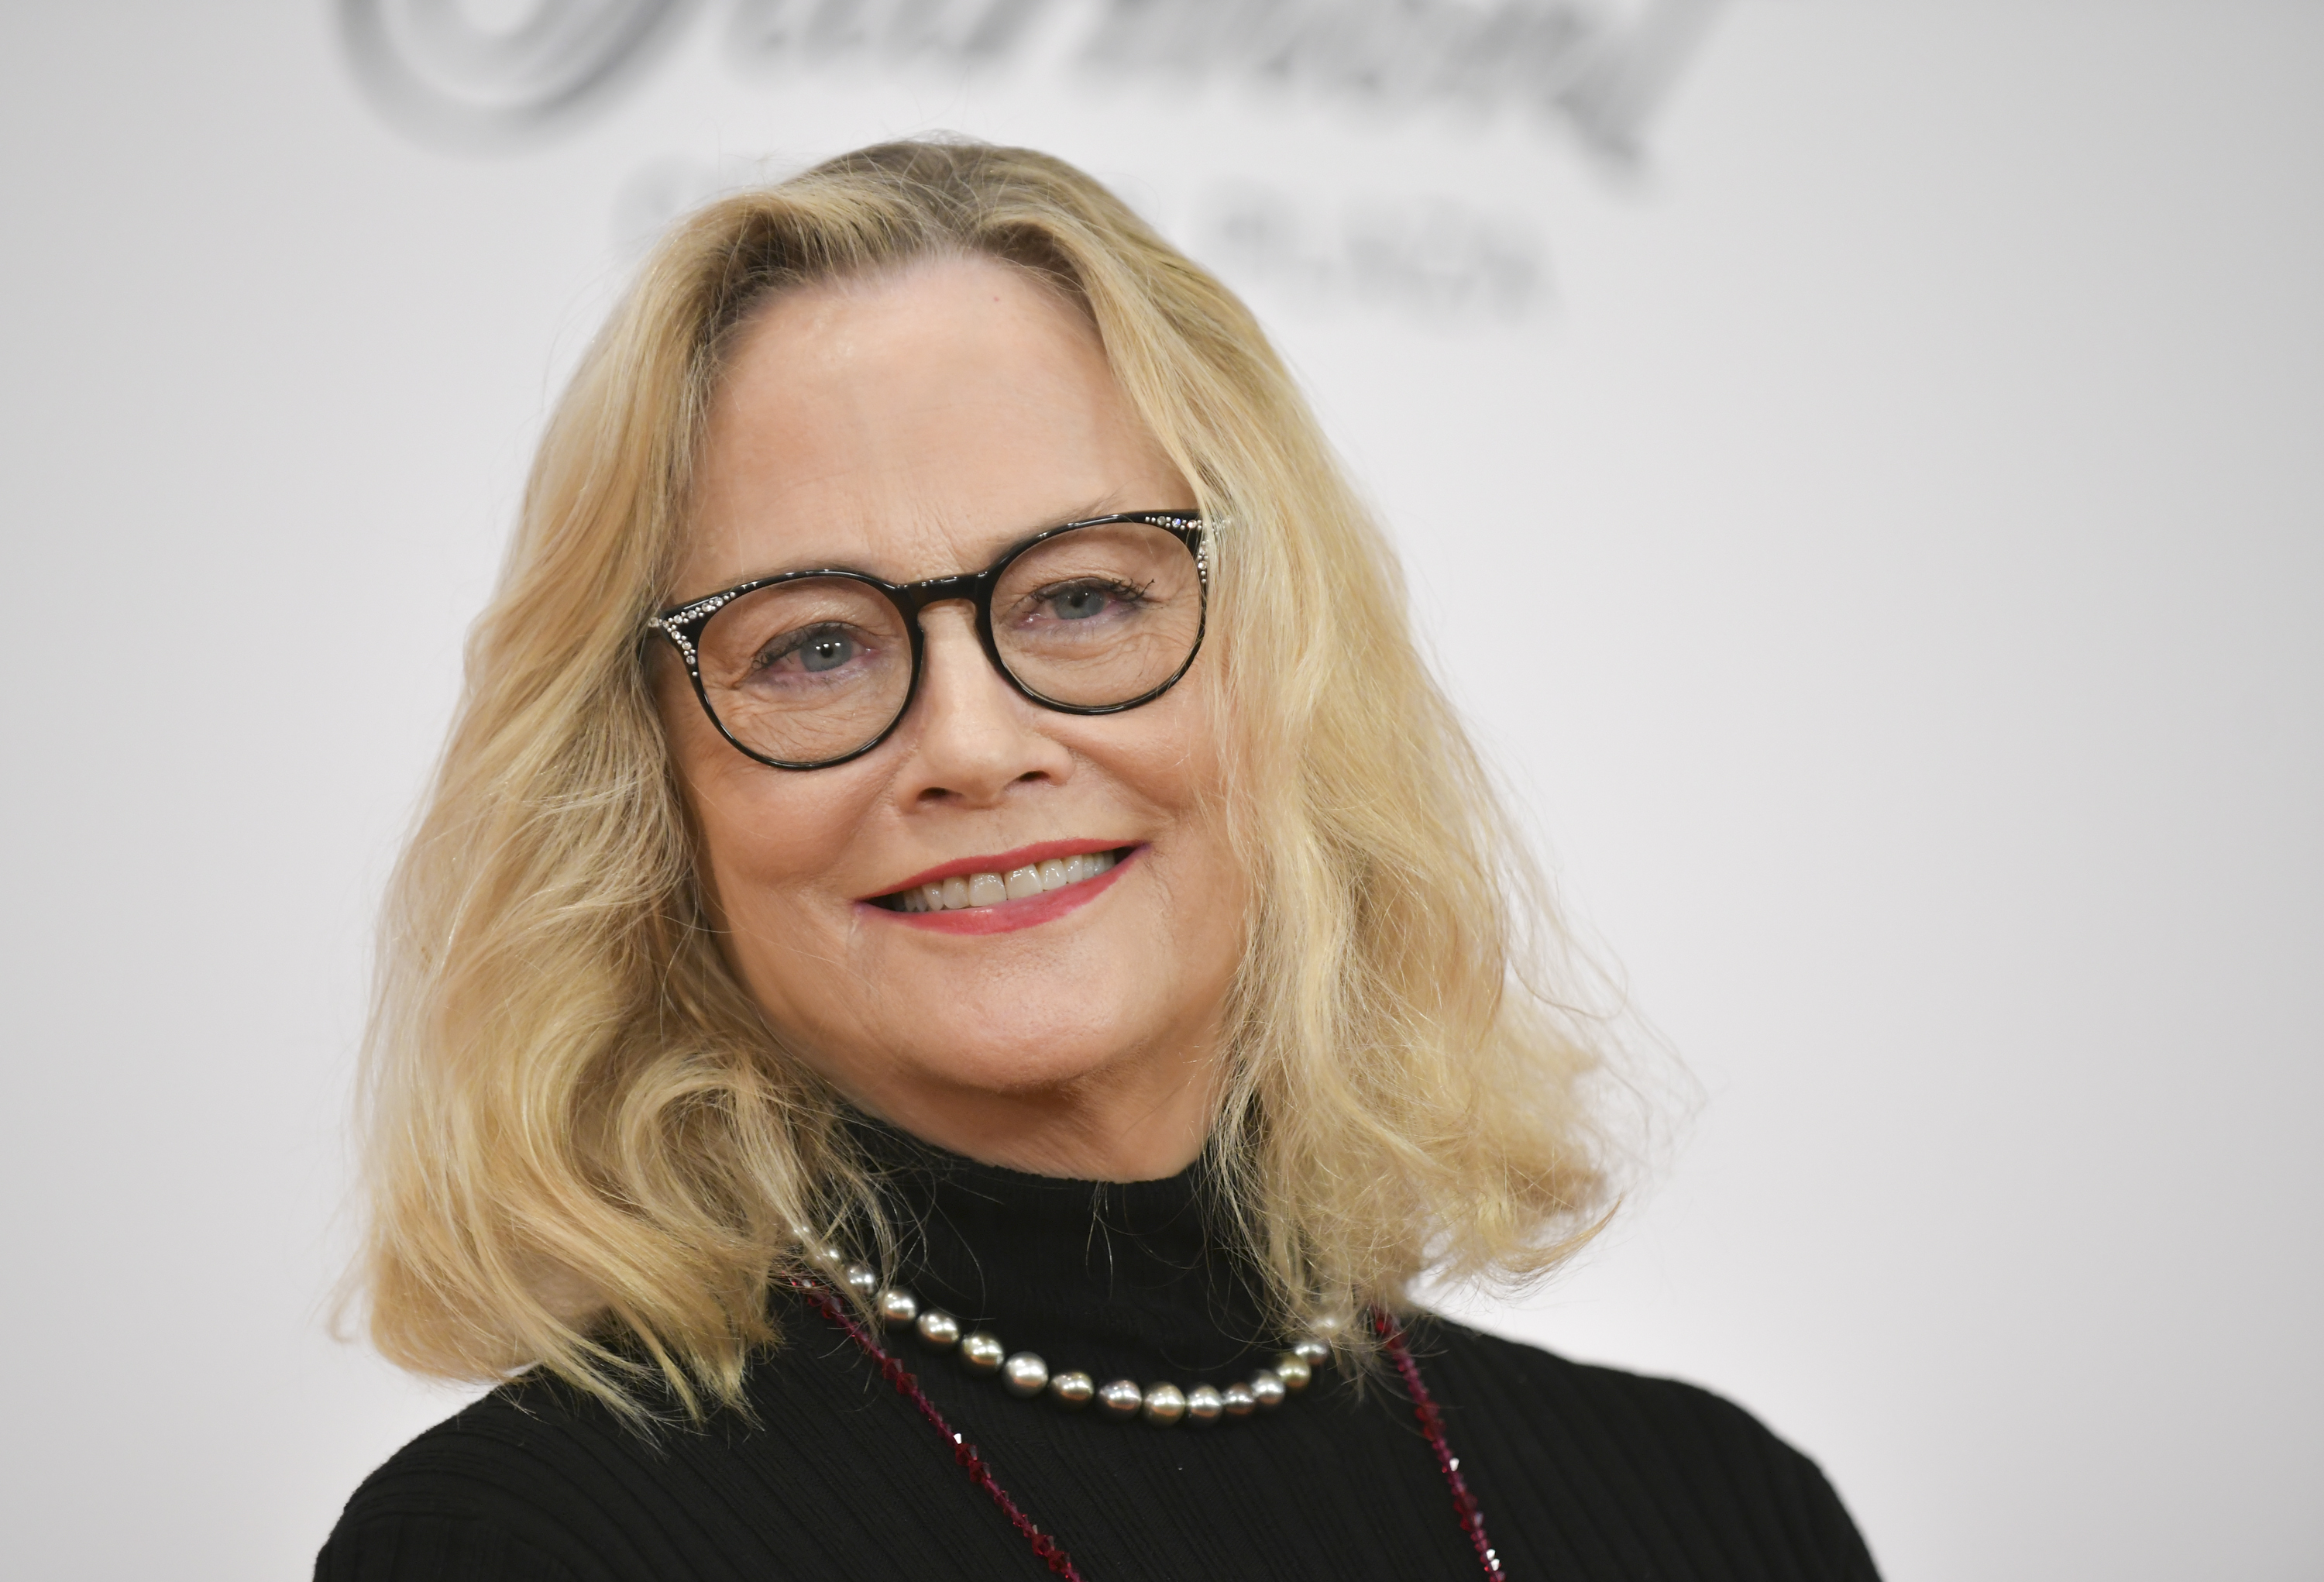 Cybill Shepherd attends the 29th annual Race to Erase MS Gala at Fairmont Century Plaza on May 20, 2022, in Los Angeles, California. | Source: Getty Images